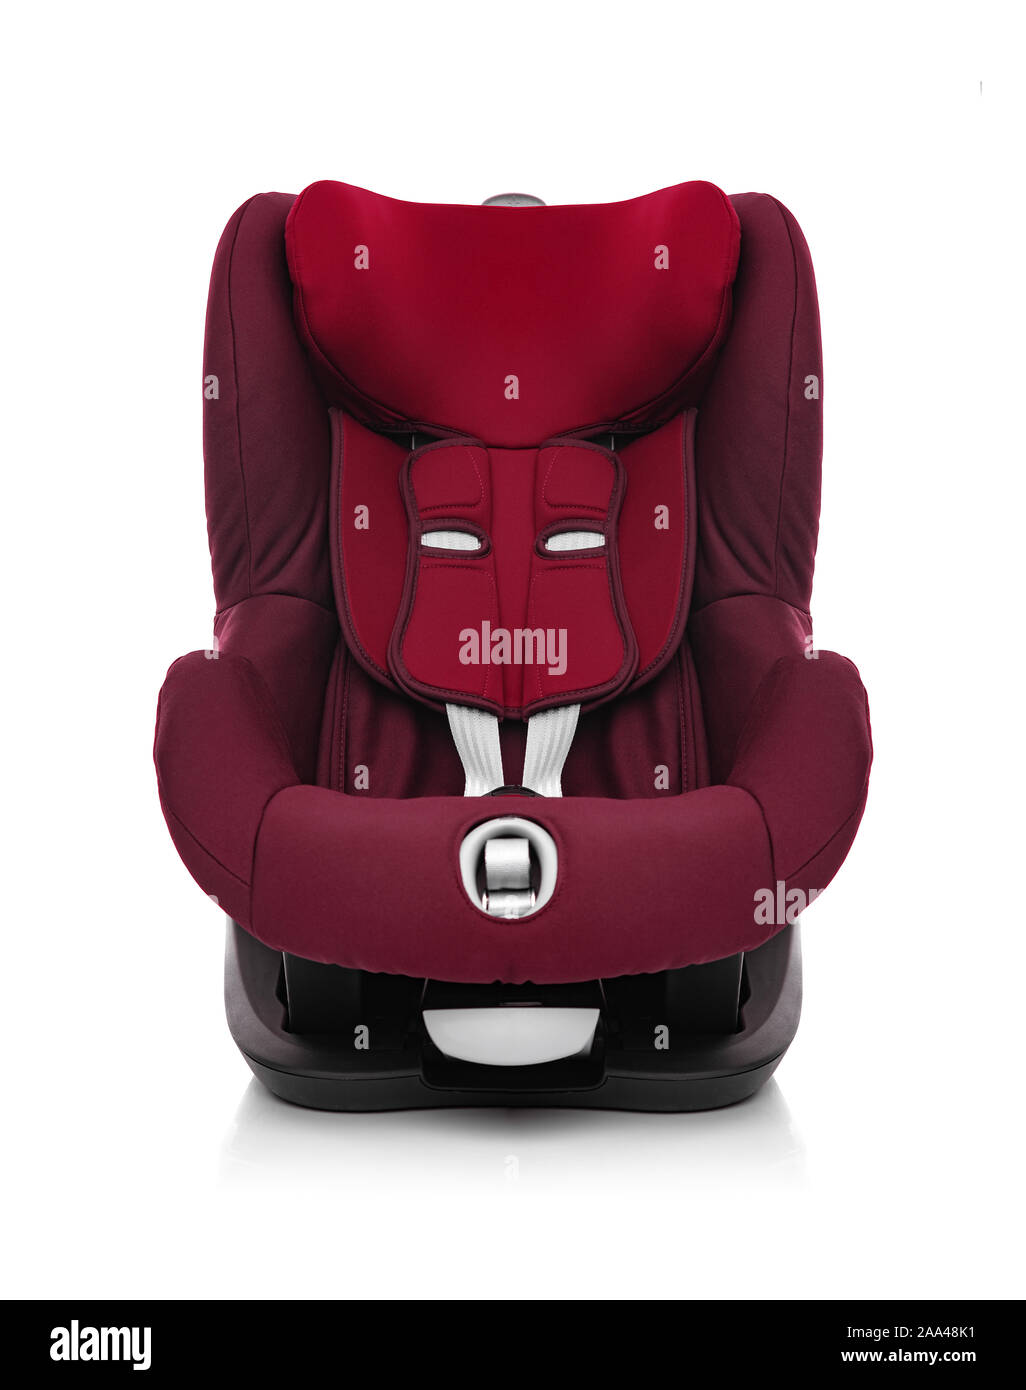 The child car seat is isolated on a white background. Stock Photo